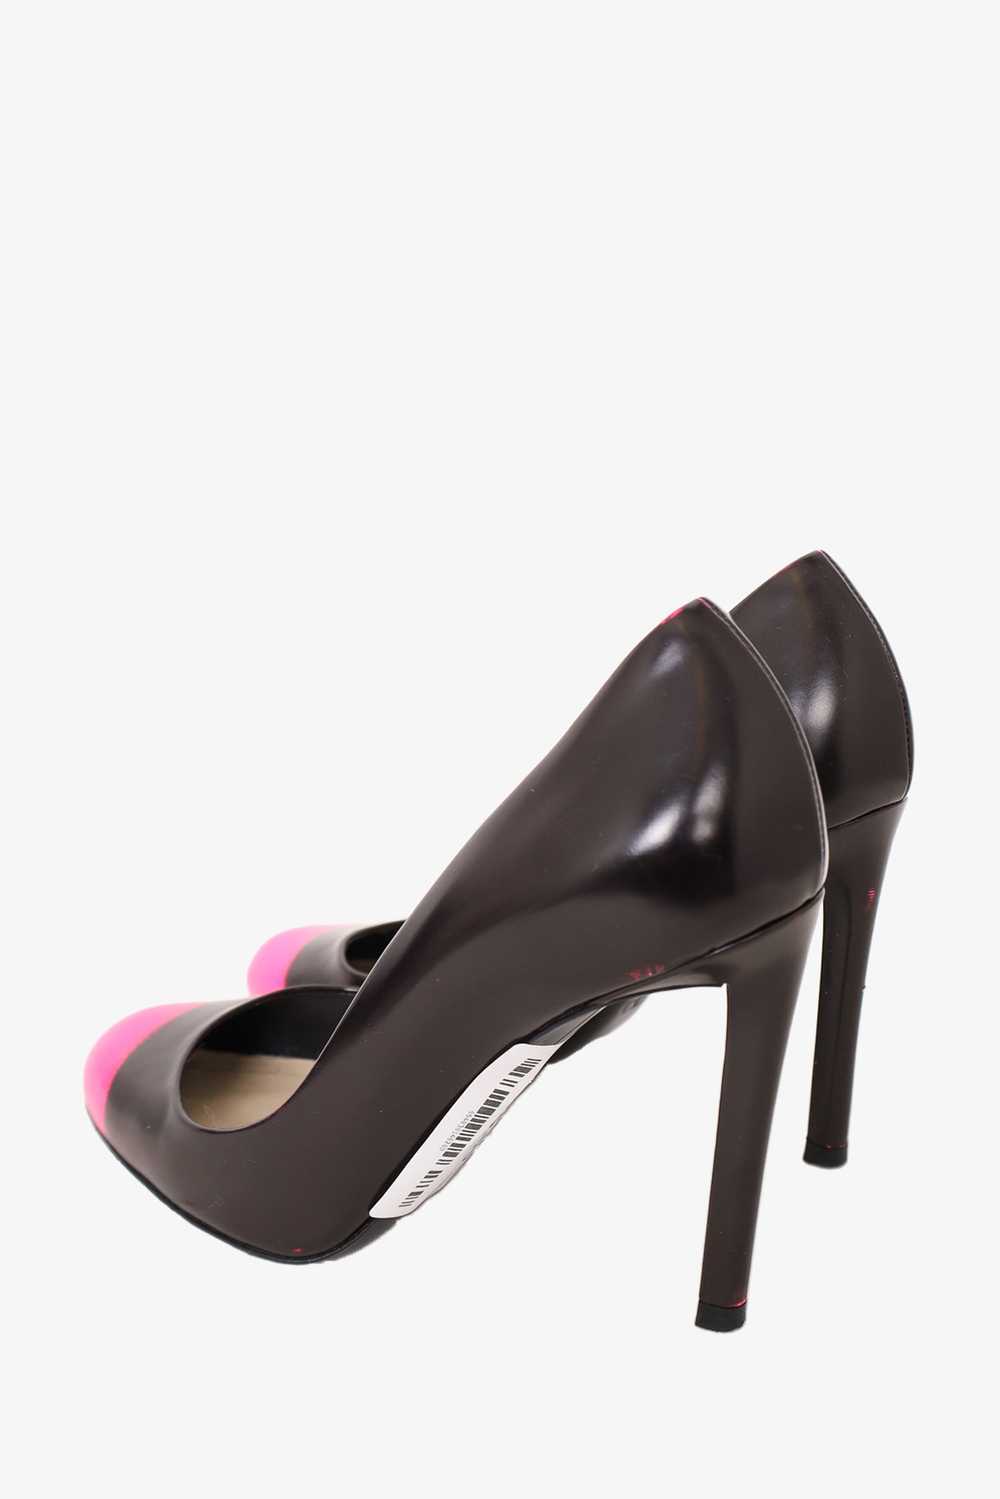 Christian Dior Black with Neon Pink Toe Leather P… - image 4